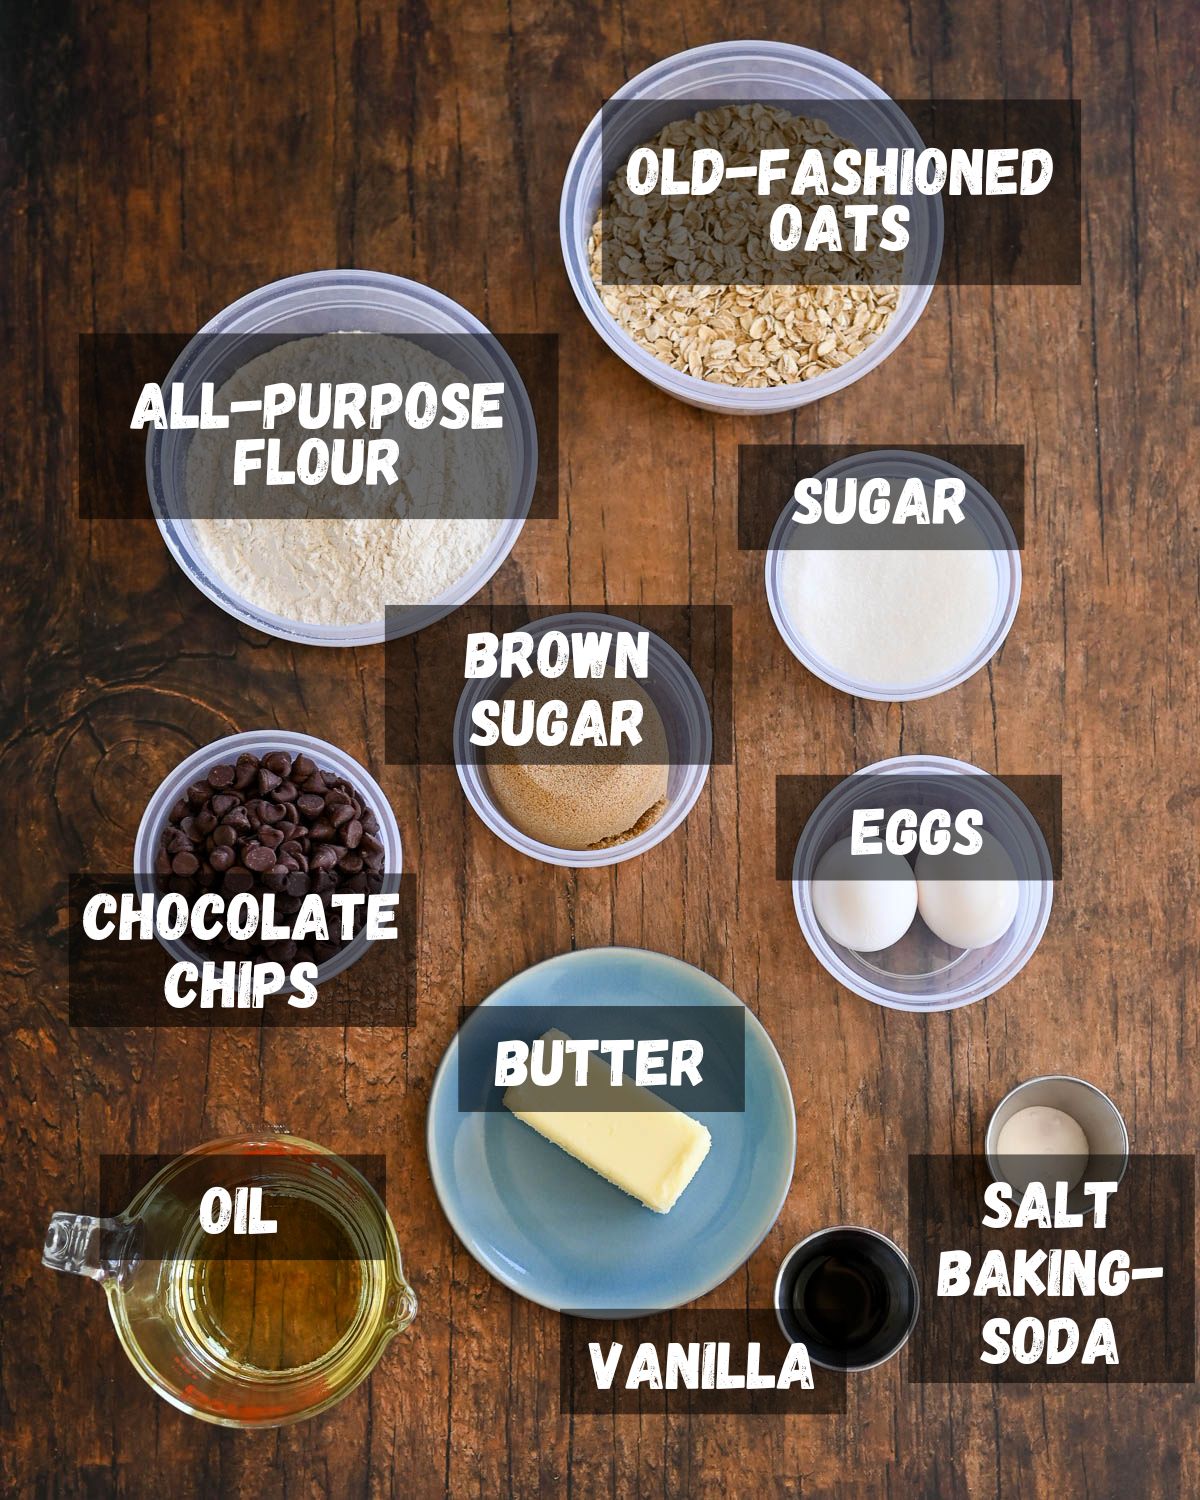 Labeled ingredients shown for oatmeal chip cookies.